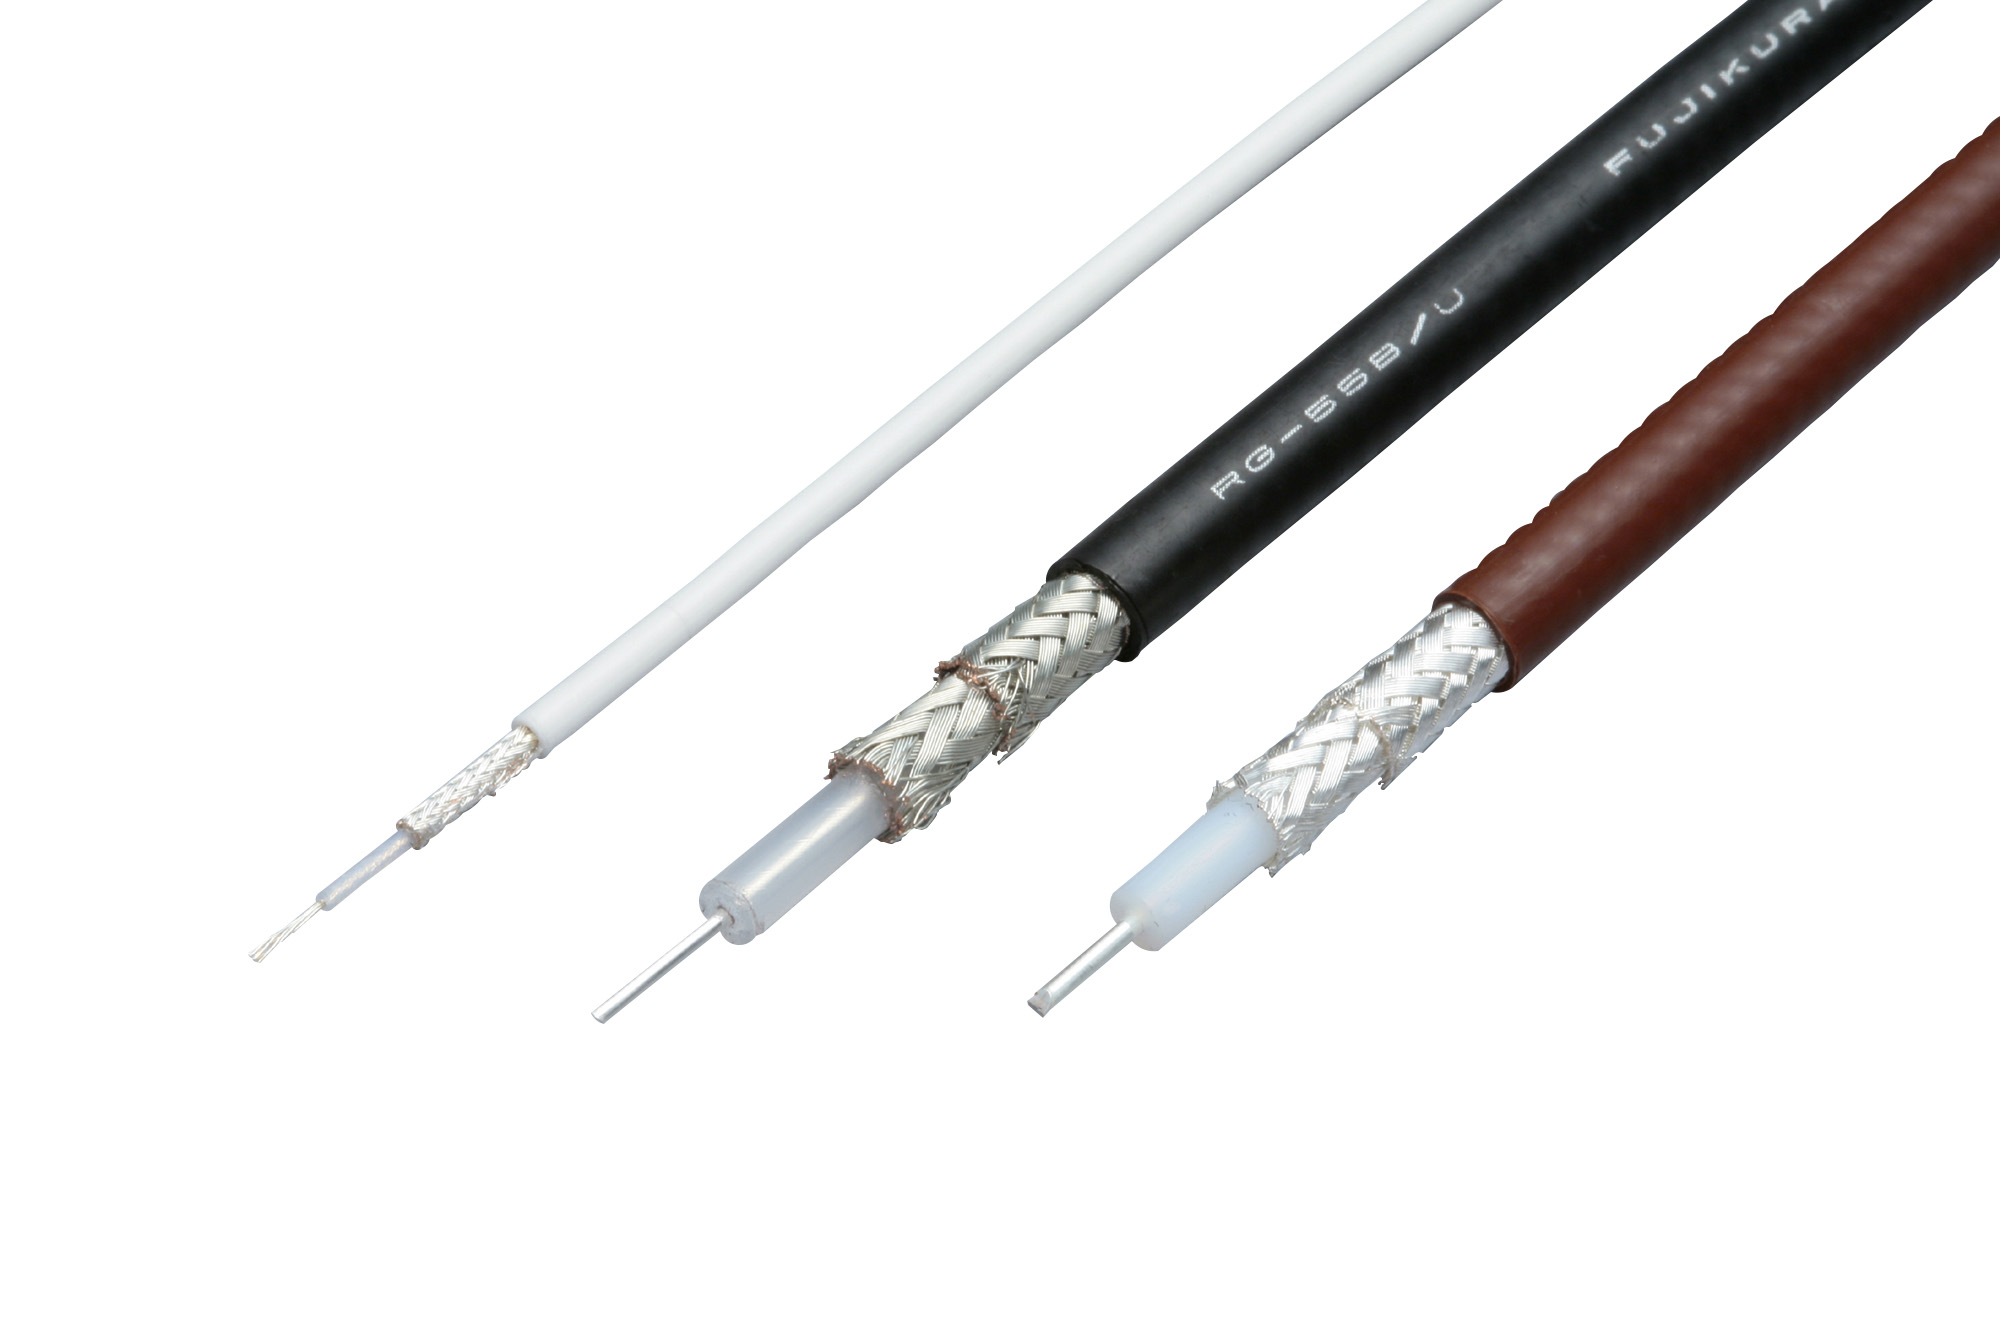 RG Type High Frequency Coaxial Cable (RG-174U-200) 